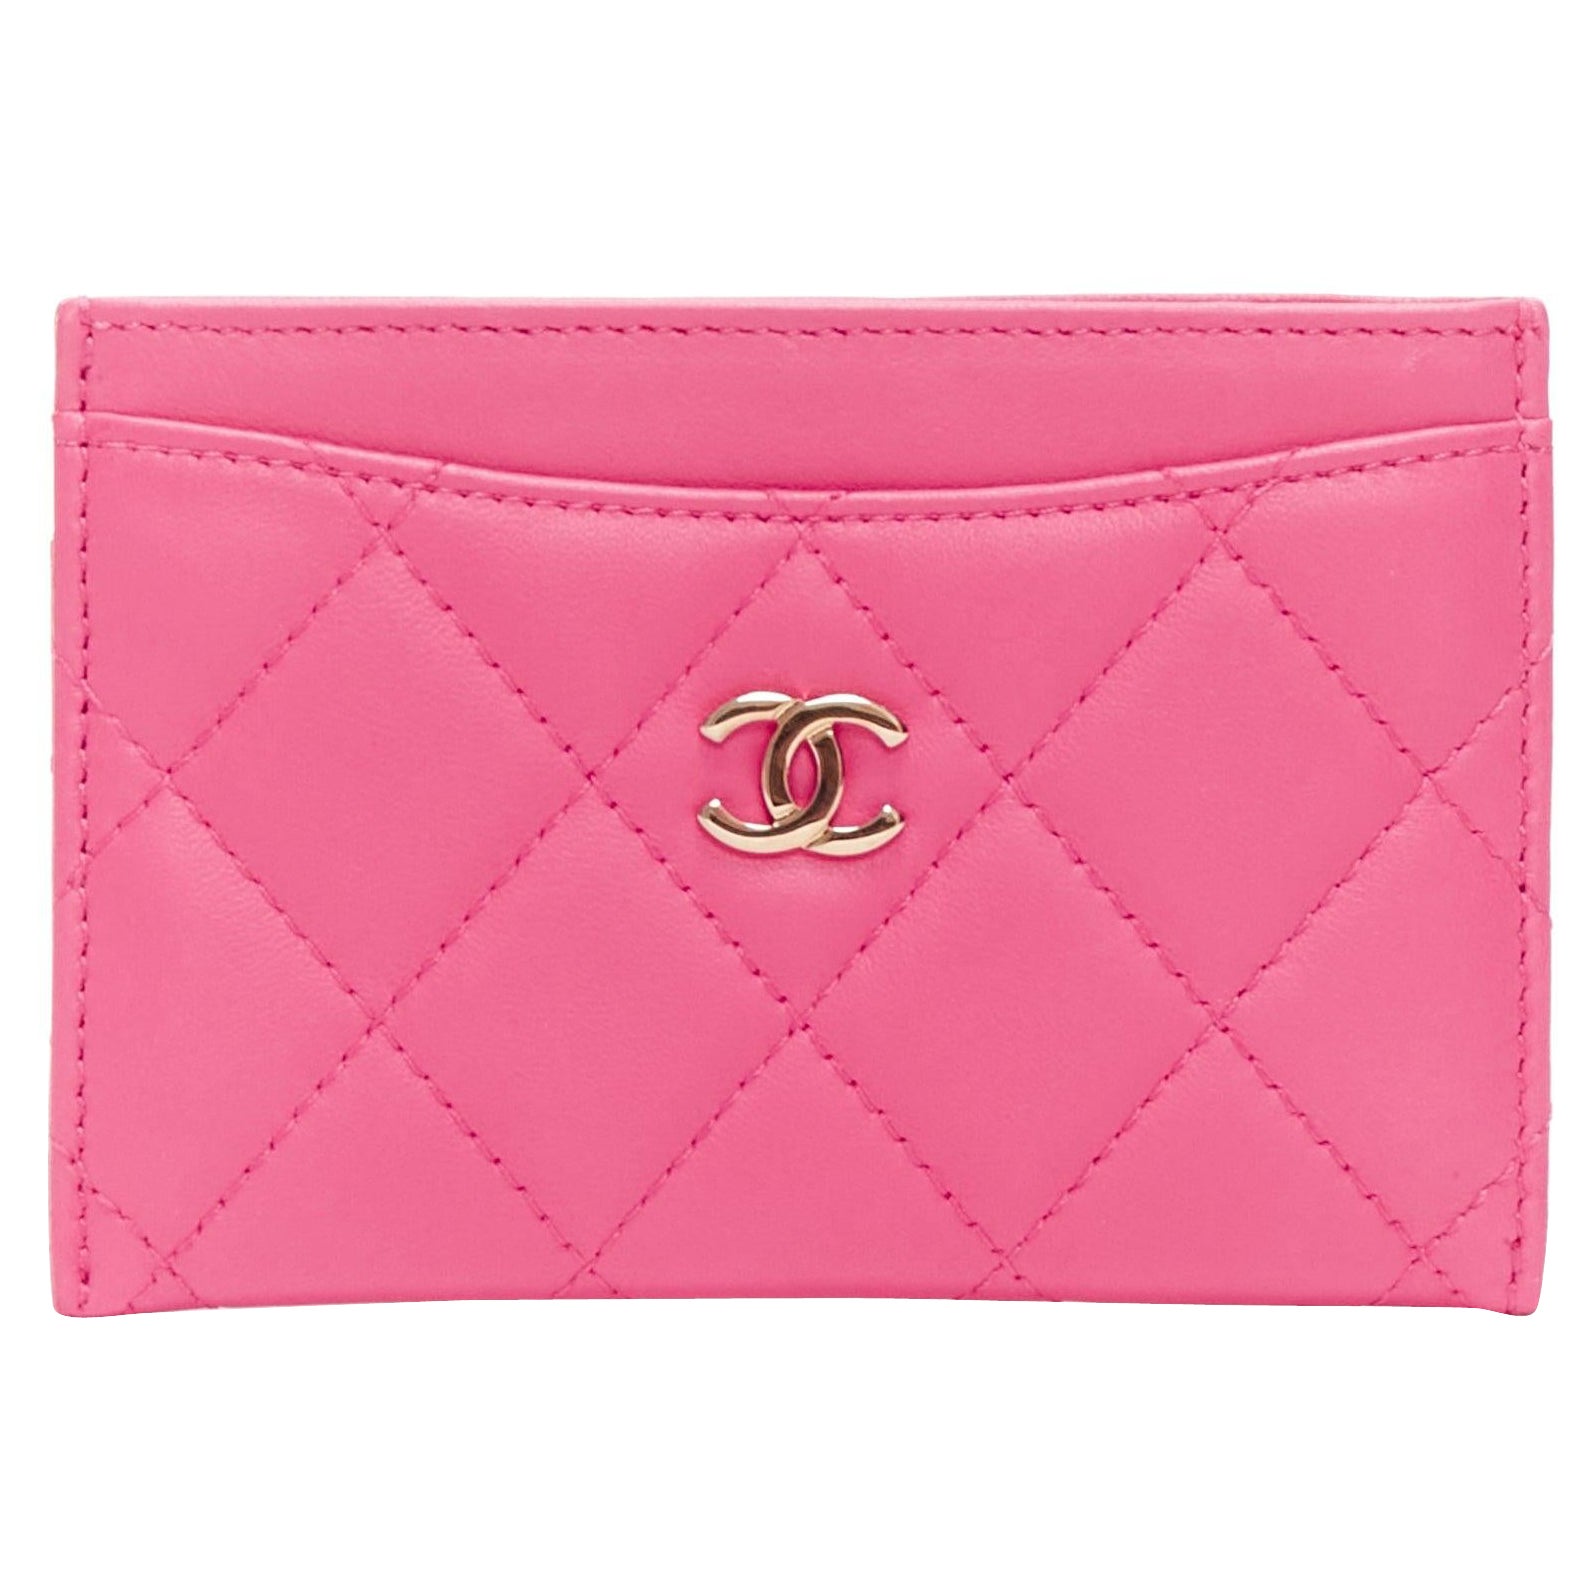 CHANEL bright pink smooth leather CC logo quilted cardholder For Sale